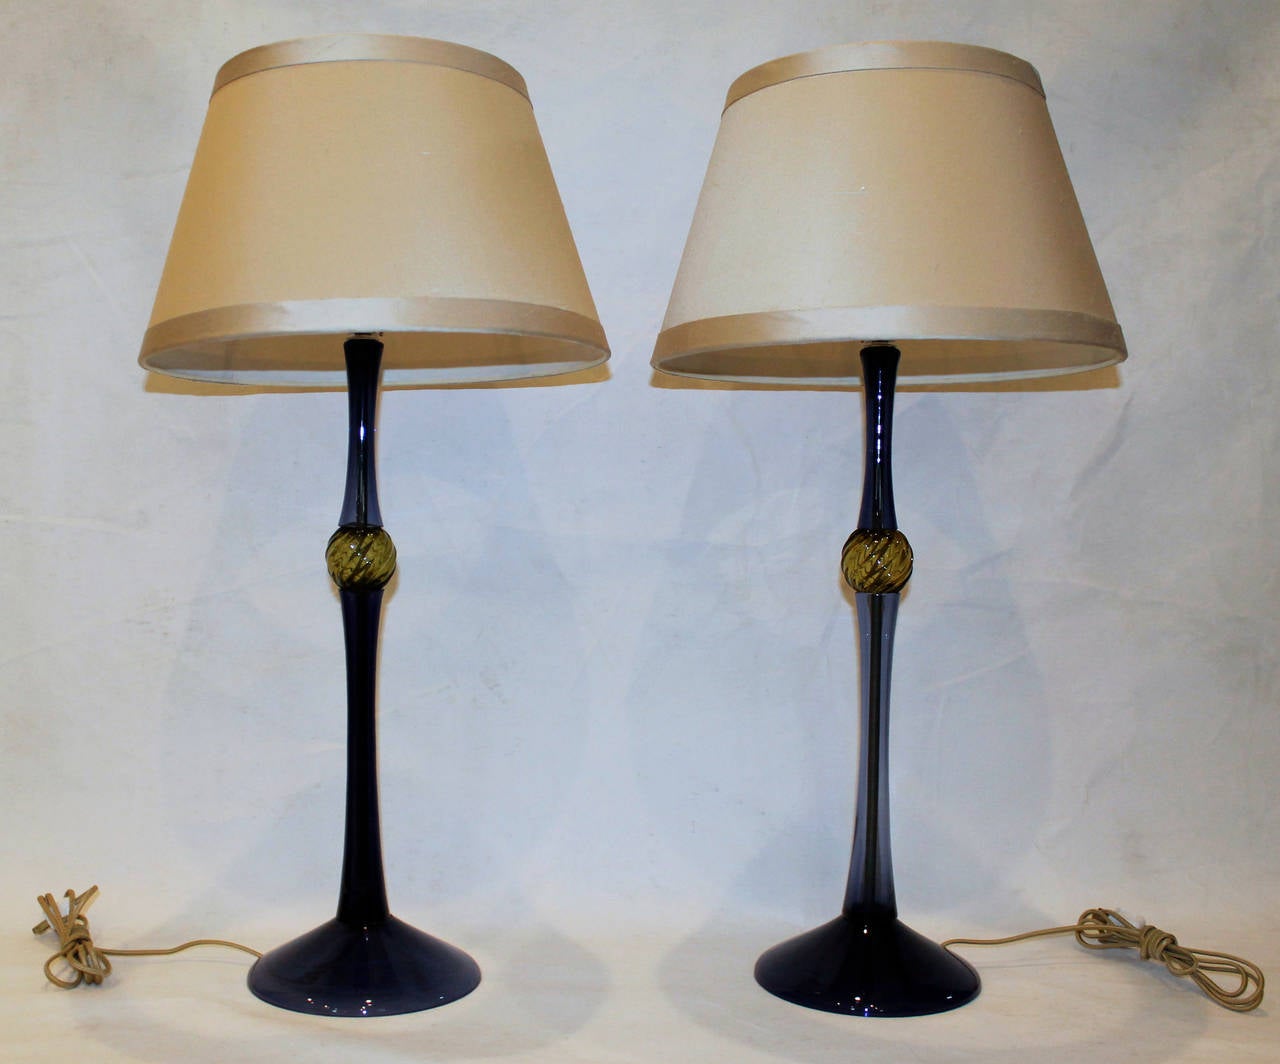 Pair of Italian blue glass lamps with absynthe green spheres by John Hutton for Donghia, signed. The pair of custom fabric shades are included. Nickel plated hardware with full rane dimmer sockets and French style rayon cords, newly wired. Overall